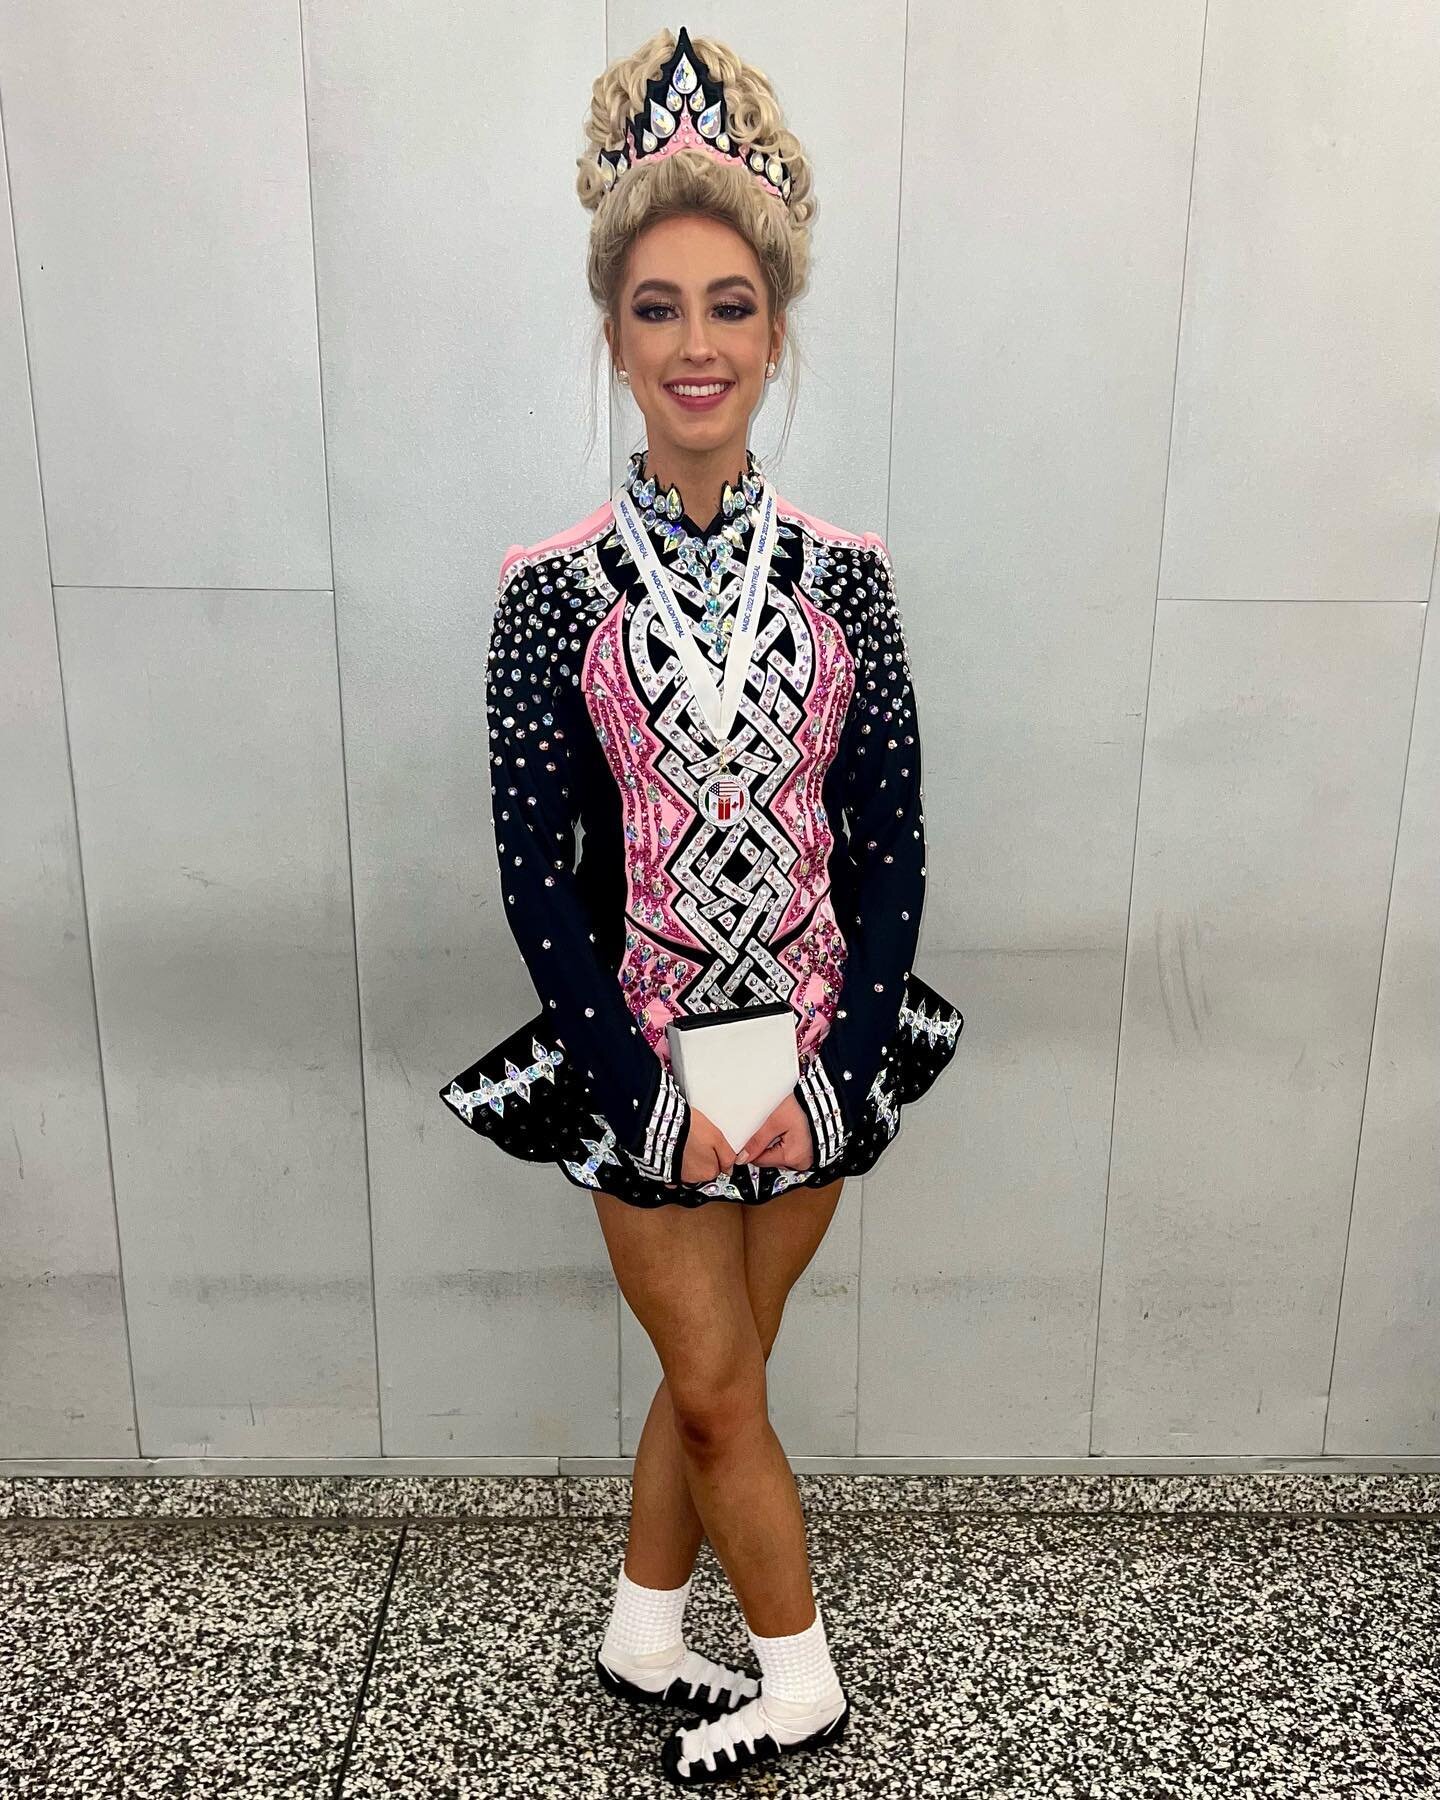 Huge congratulations to our beautiful Tara. 26th at the North American Irish Dance Championships in an incredible U20 competition! 🏆✨
You&rsquo;re a star Tara, and we can&rsquo;t wait to have you home! 💕

Thank you @mattierin @bexbellx for taking s